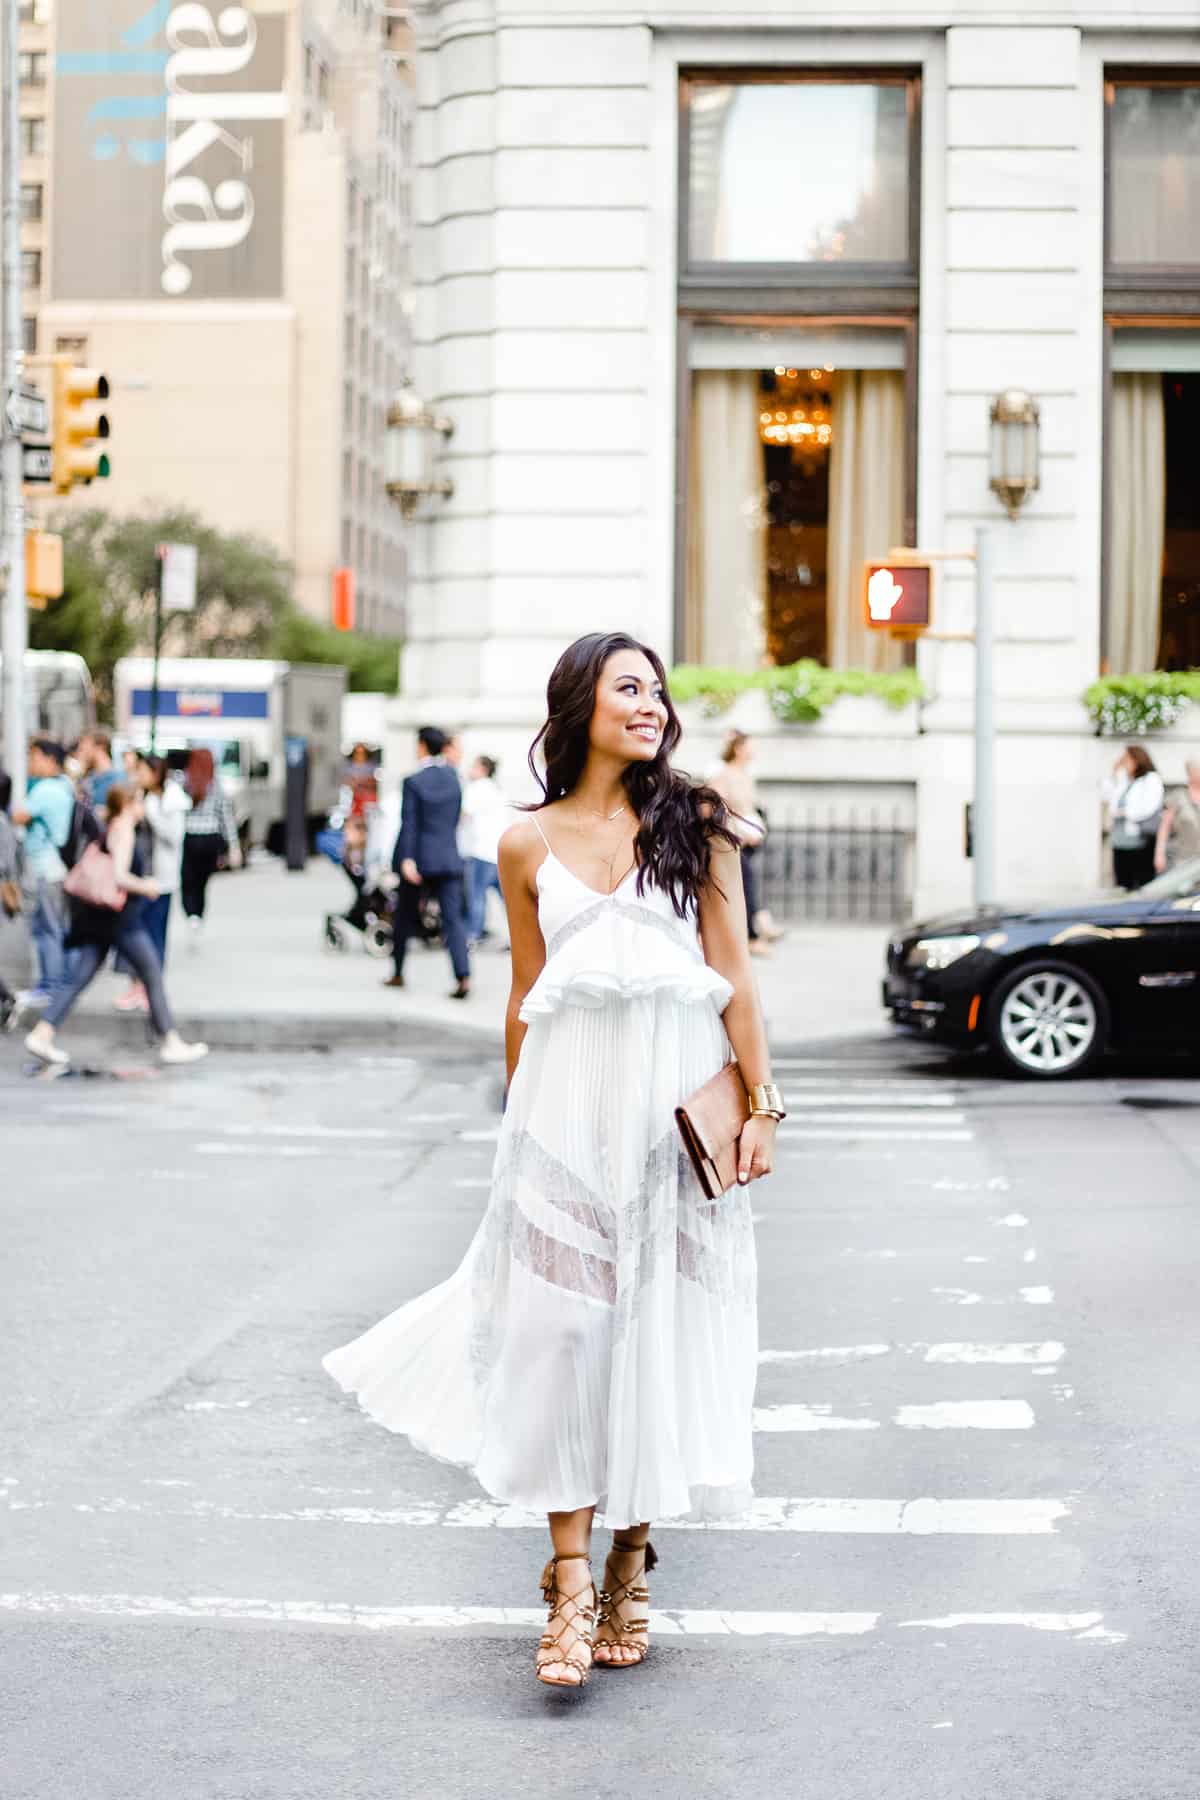 Young woman in white dress walks through a cross walk in the city.